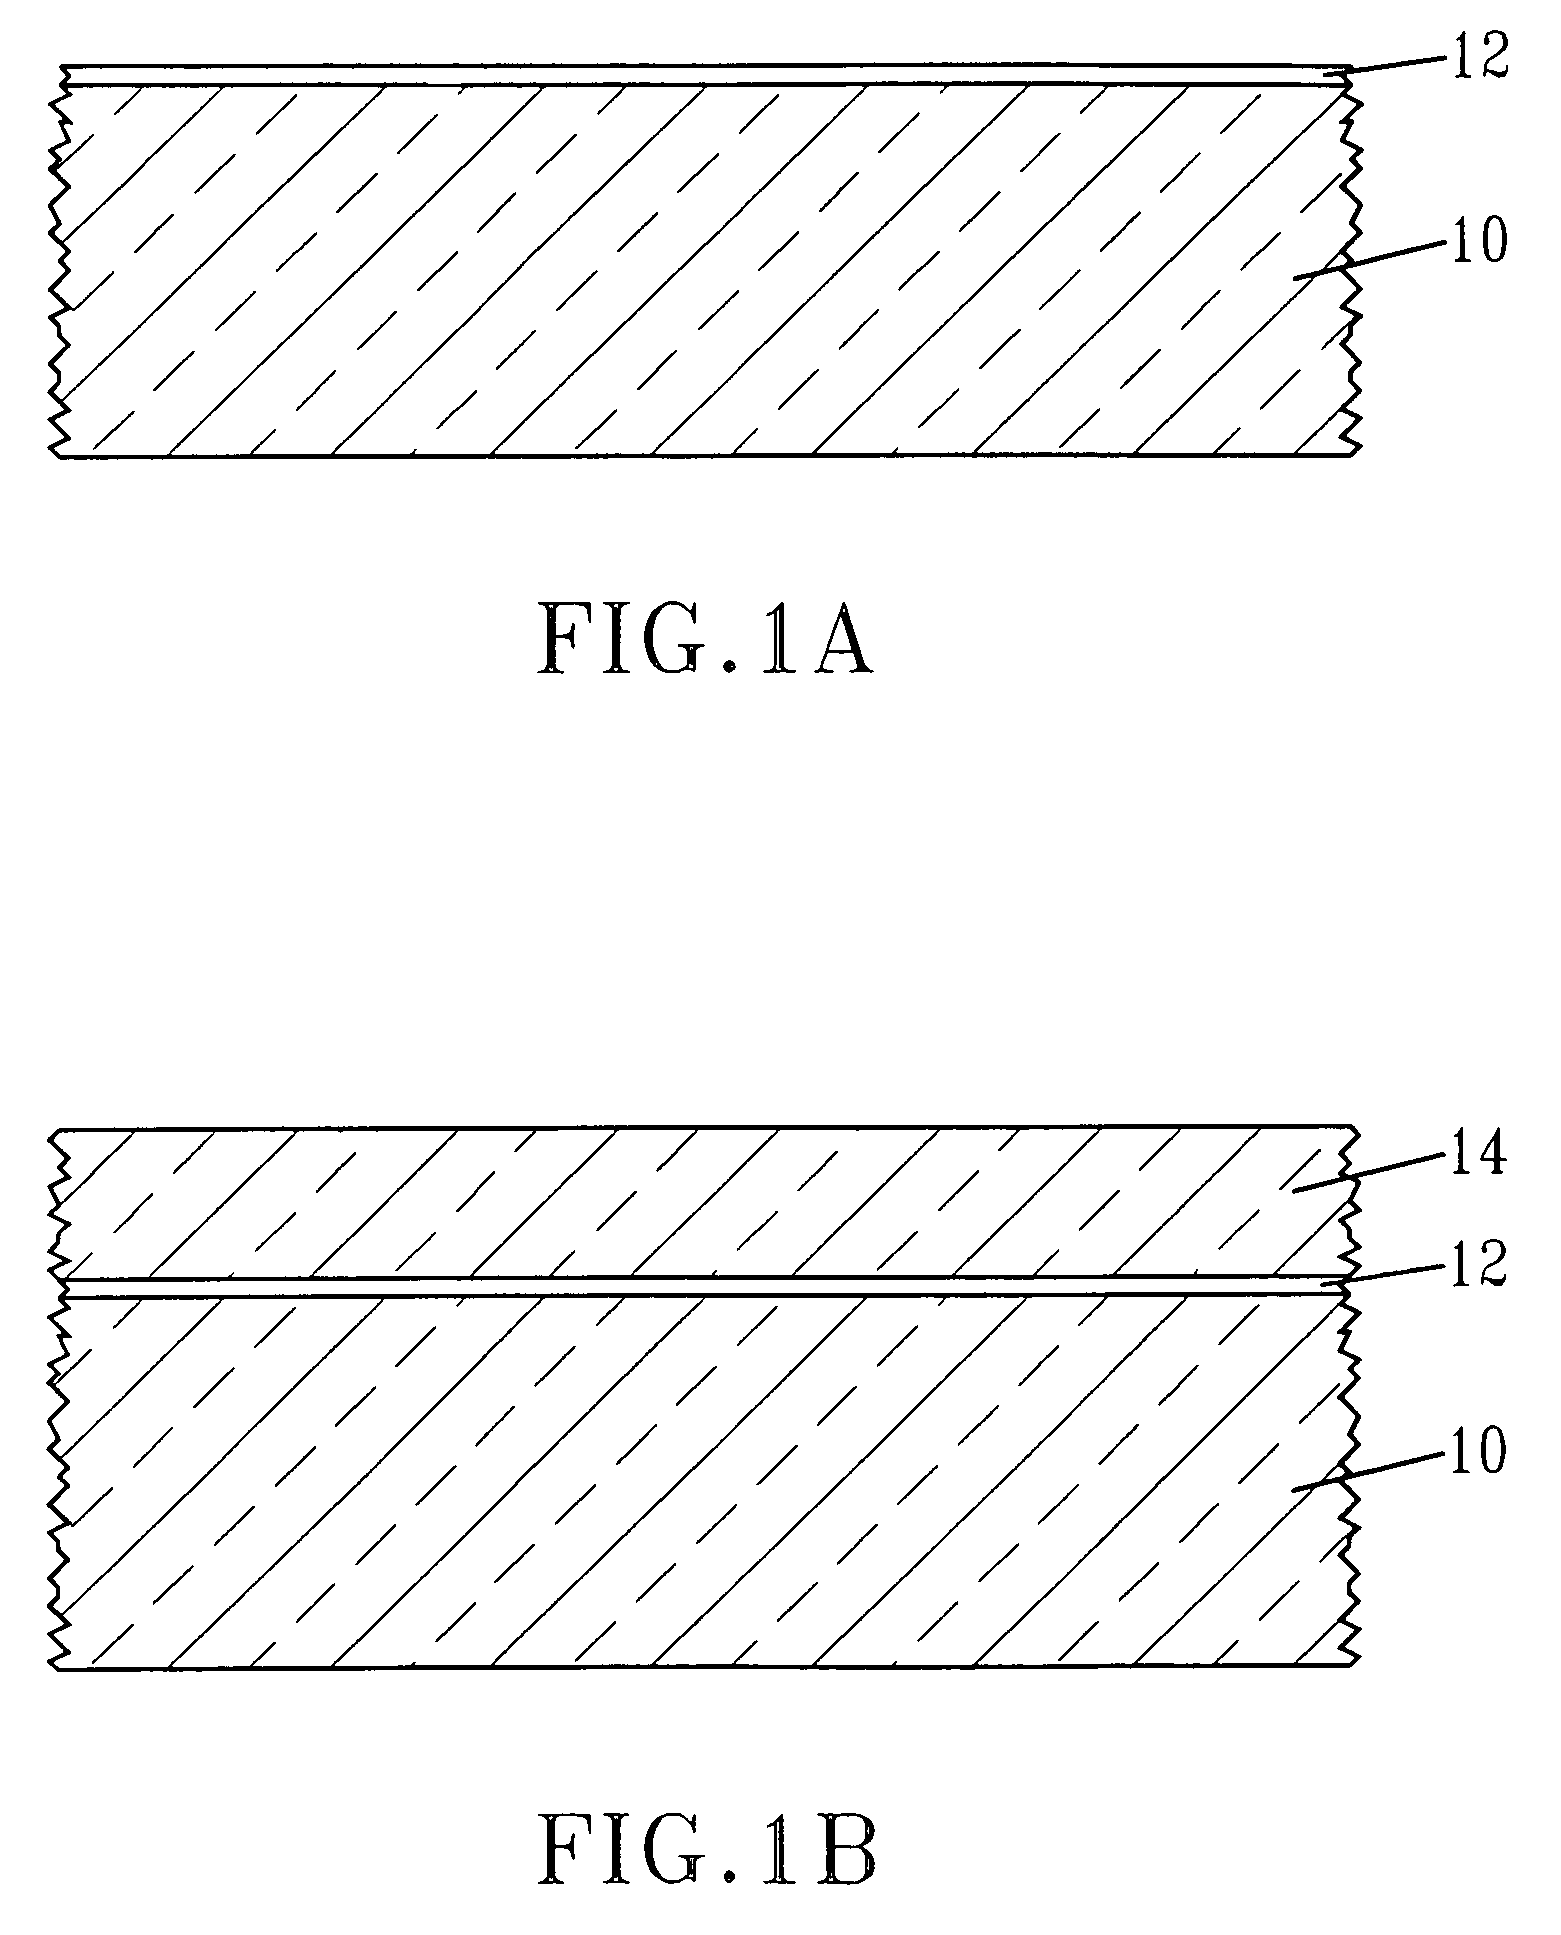 Chemical treatment to retard diffusion in a semiconductor overlayer